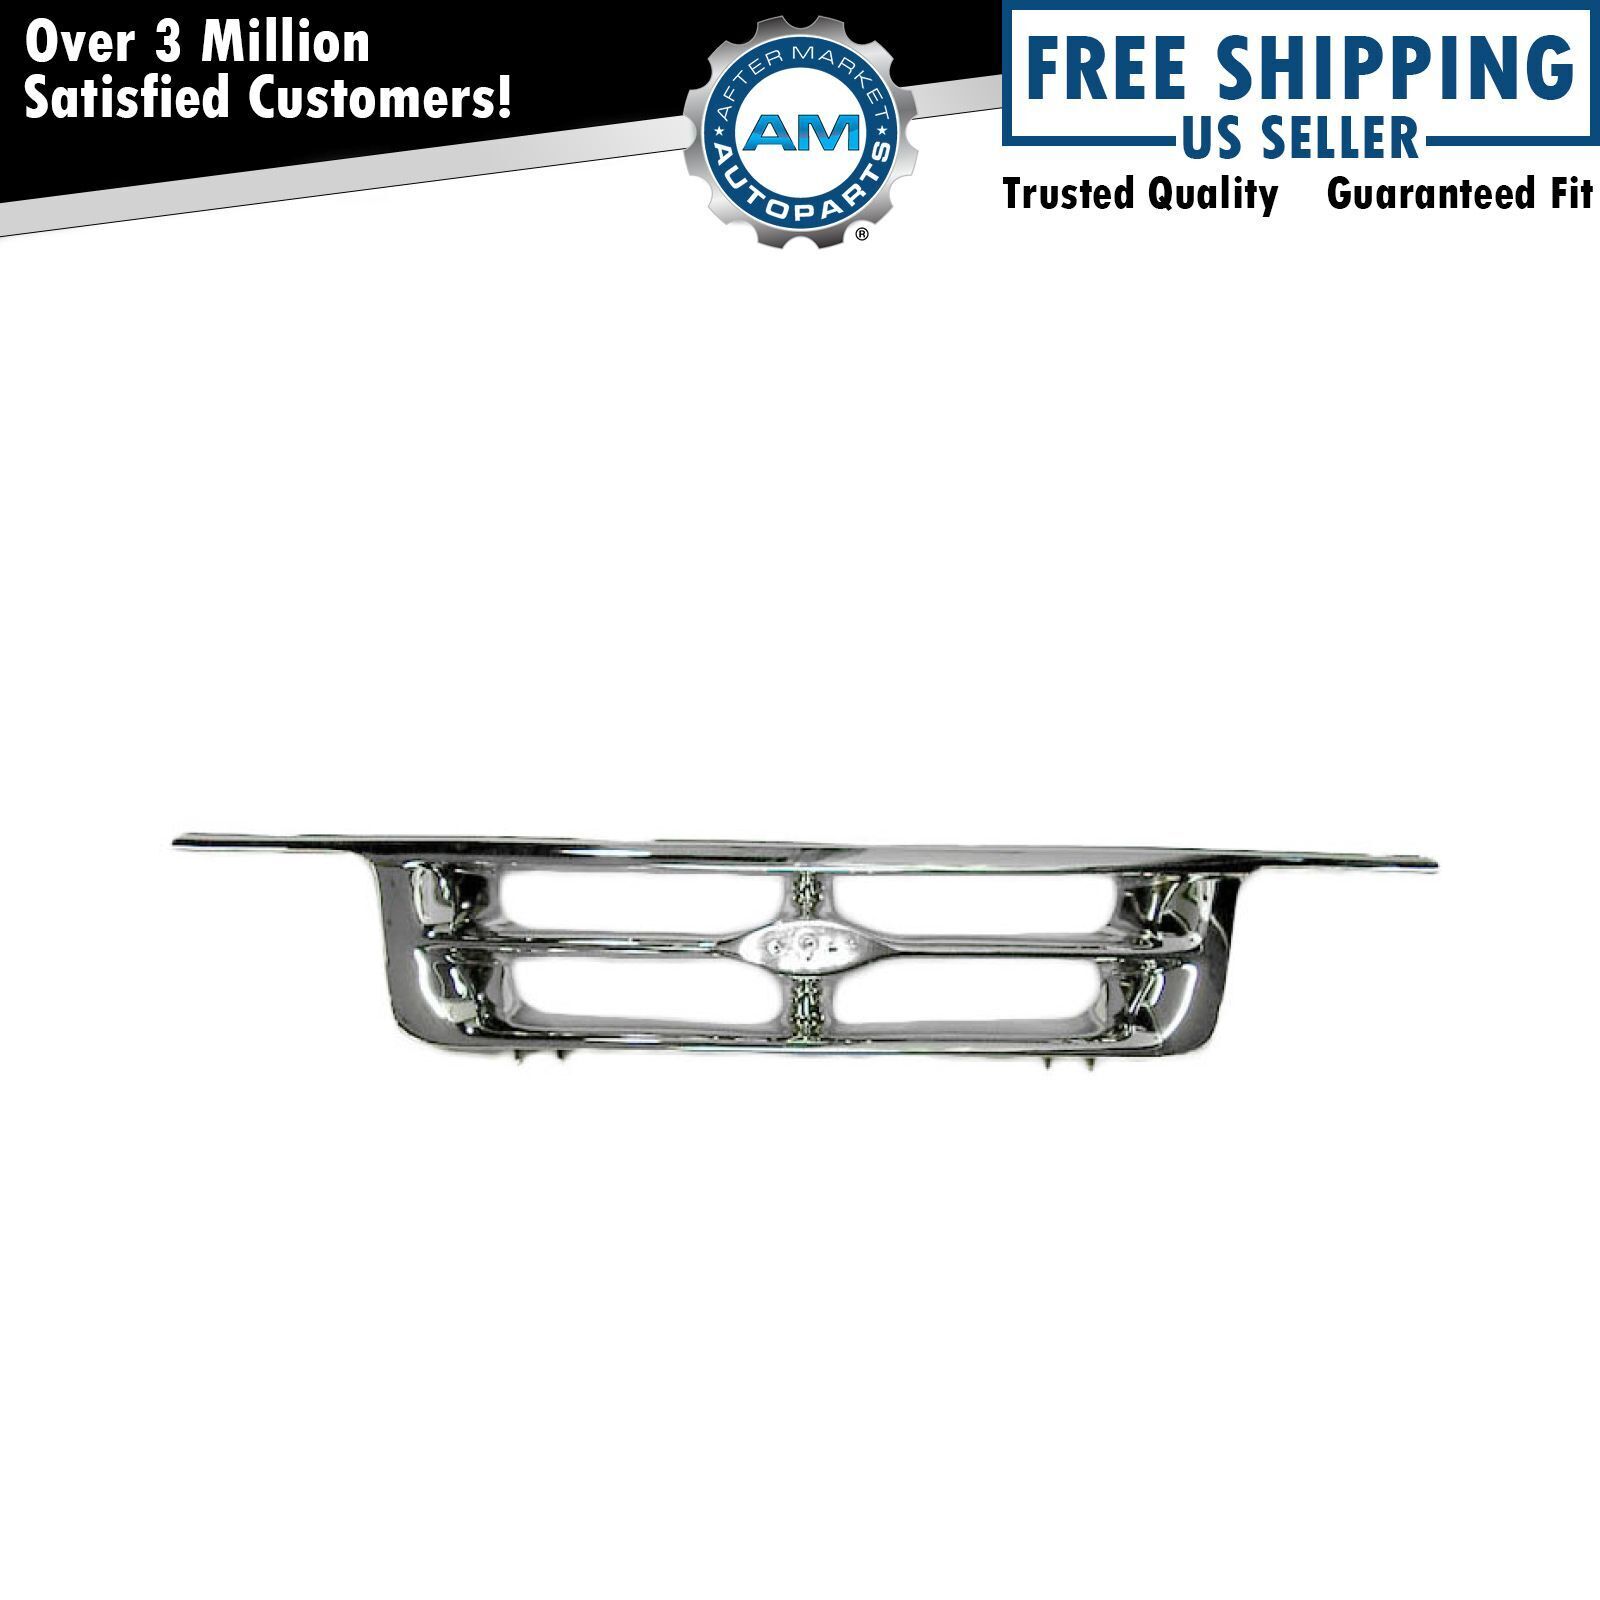 Grille Grill Front All Chrome for 95-97 Ford Ranger Pickup Truck